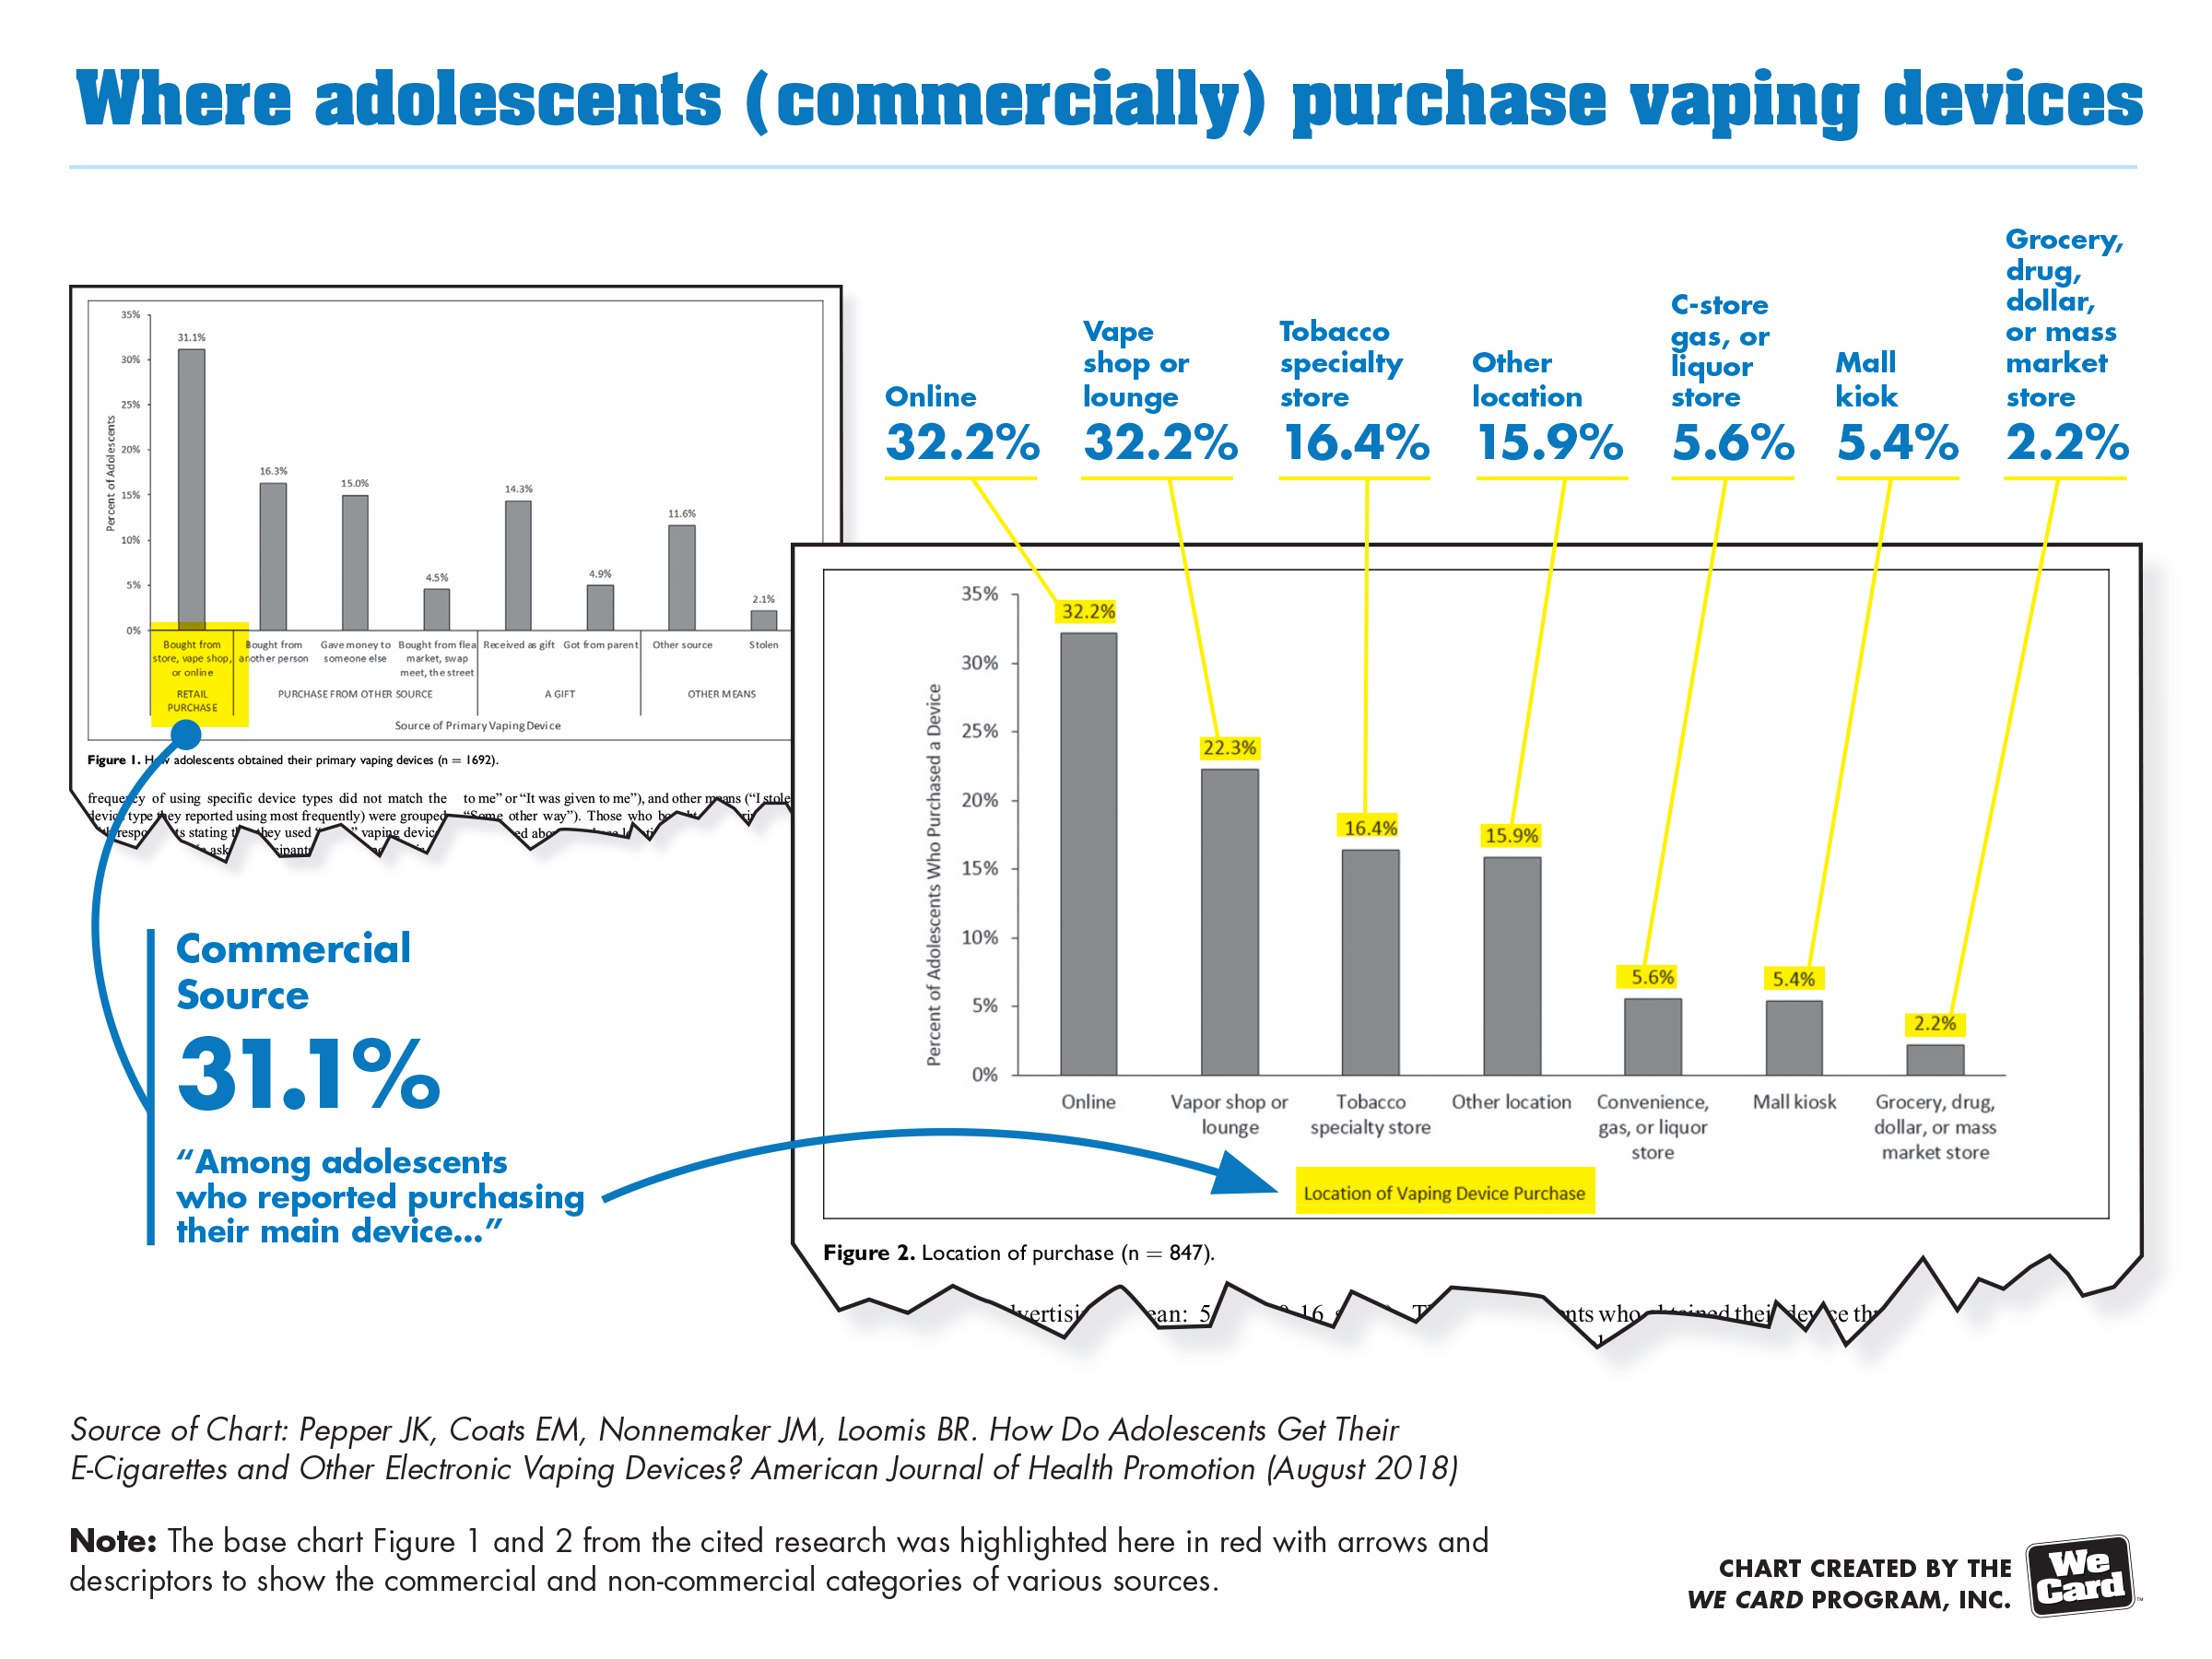 Where Adolescents Purchase Vaping Devices